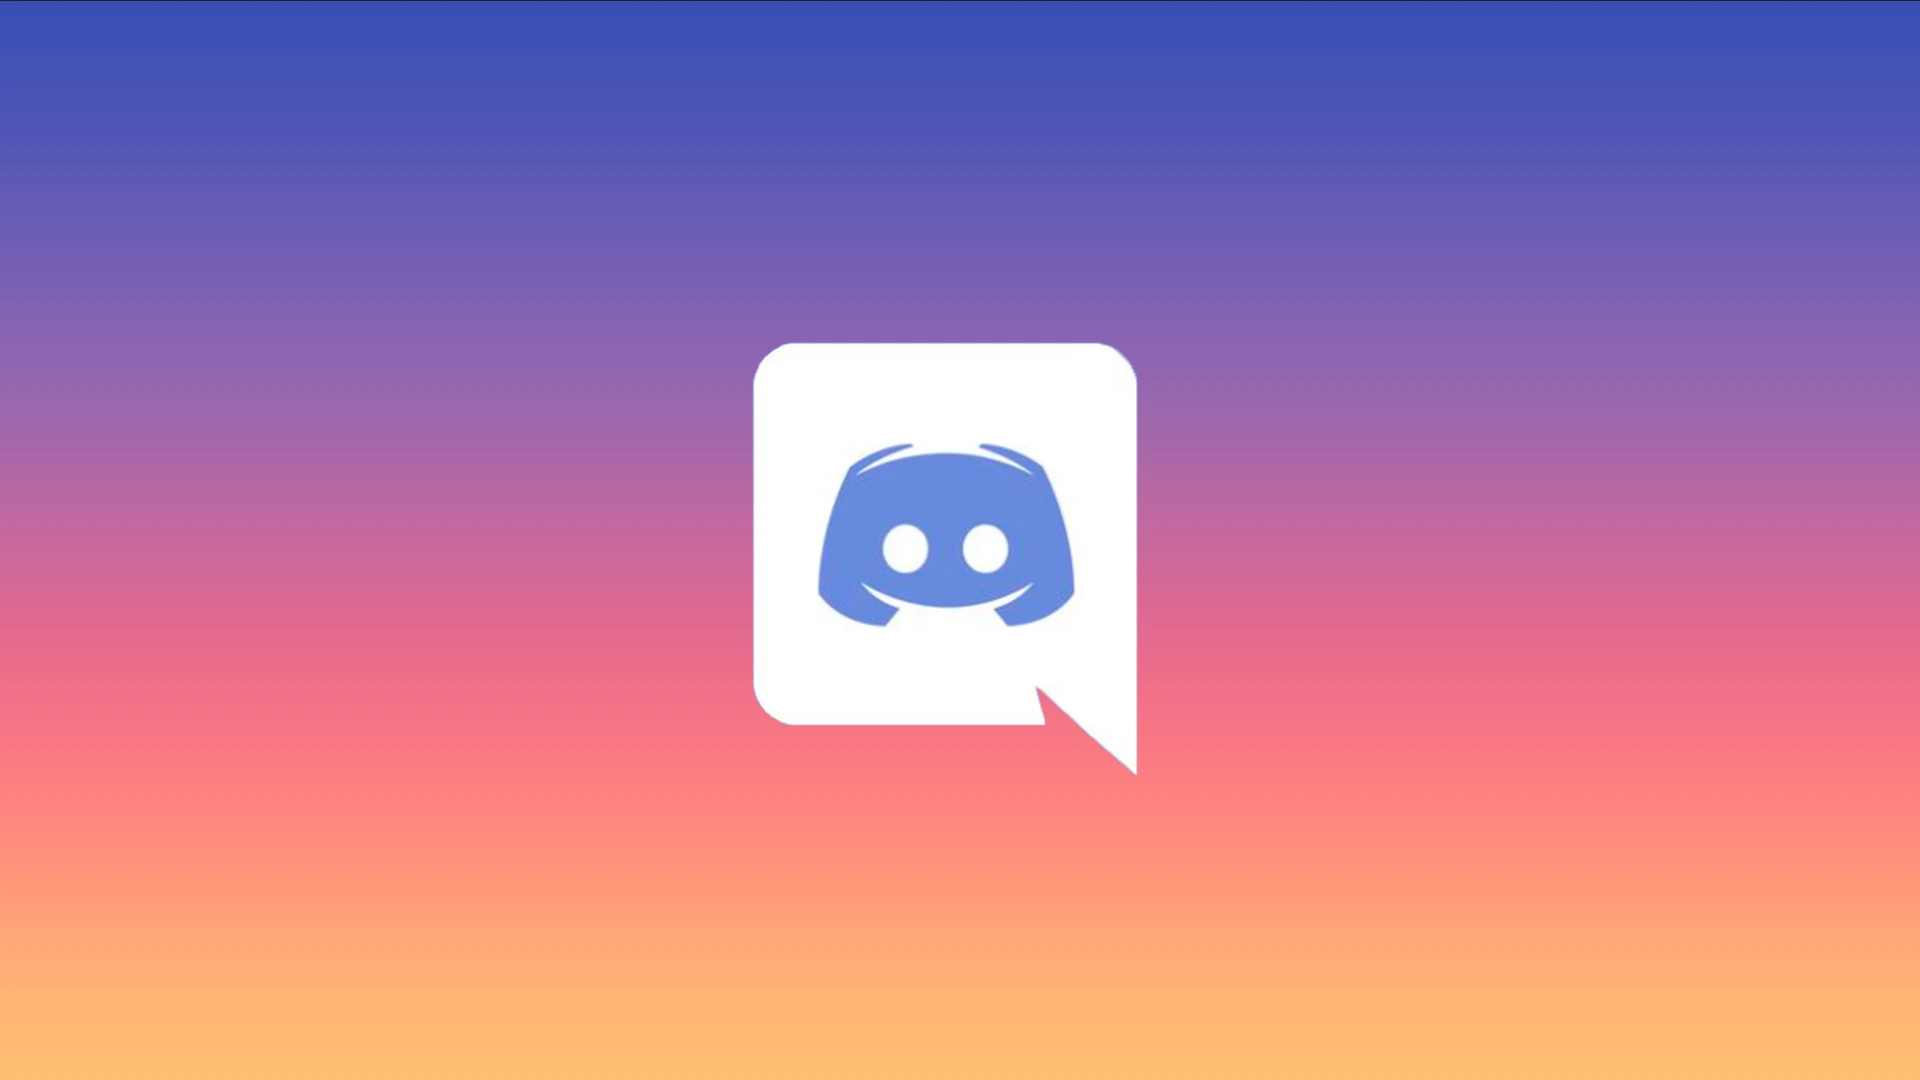 How to add Bots to your Discord server